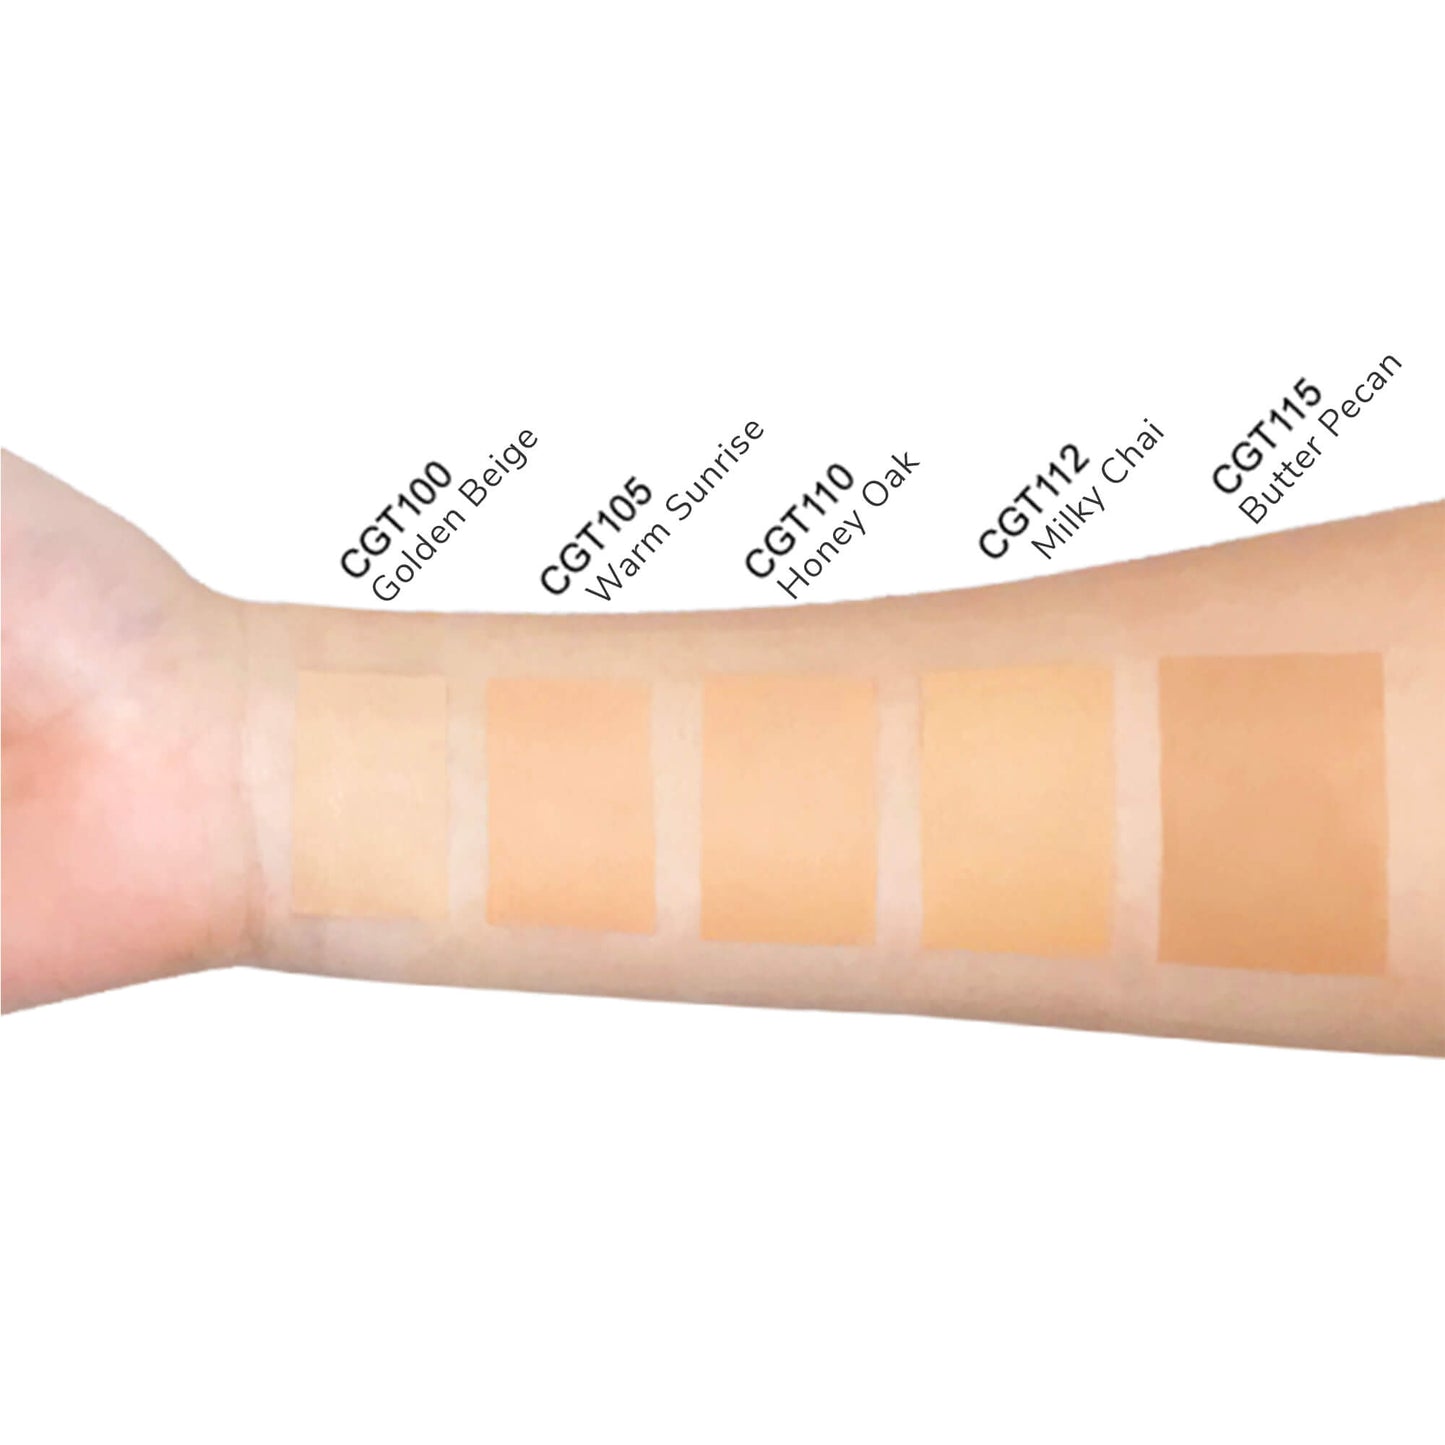 Effortlessly conceal with Cruisin Organics Sunrise Concealer Stick. Achieve medium to full coverage and a matte finish. Use darker shades to contour and highlight with lighter shades.